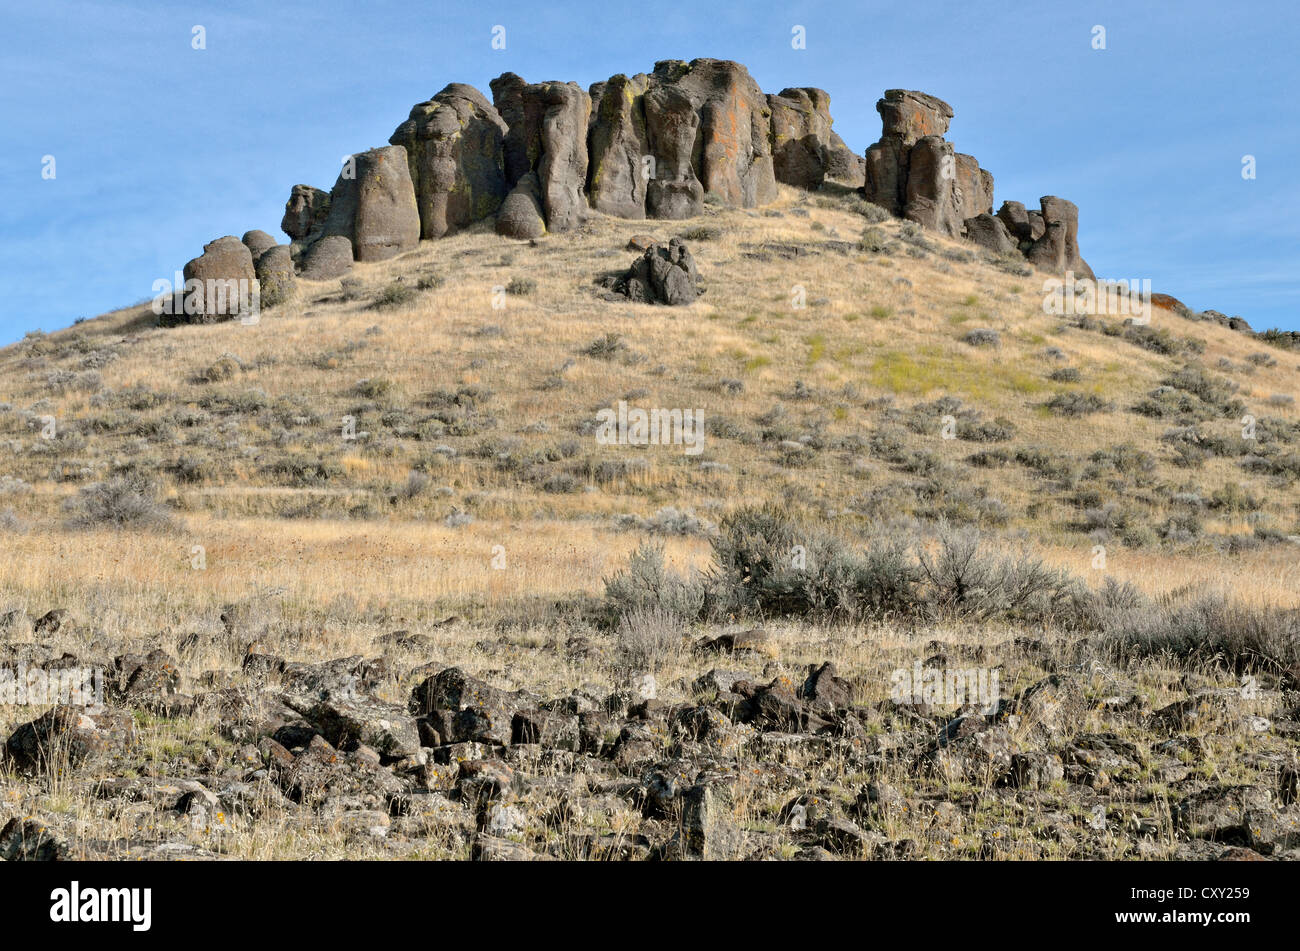 Volcanic rock formations in the Bennett Hills, Highway 46, Gooding, Idaho, USA Stock Photo